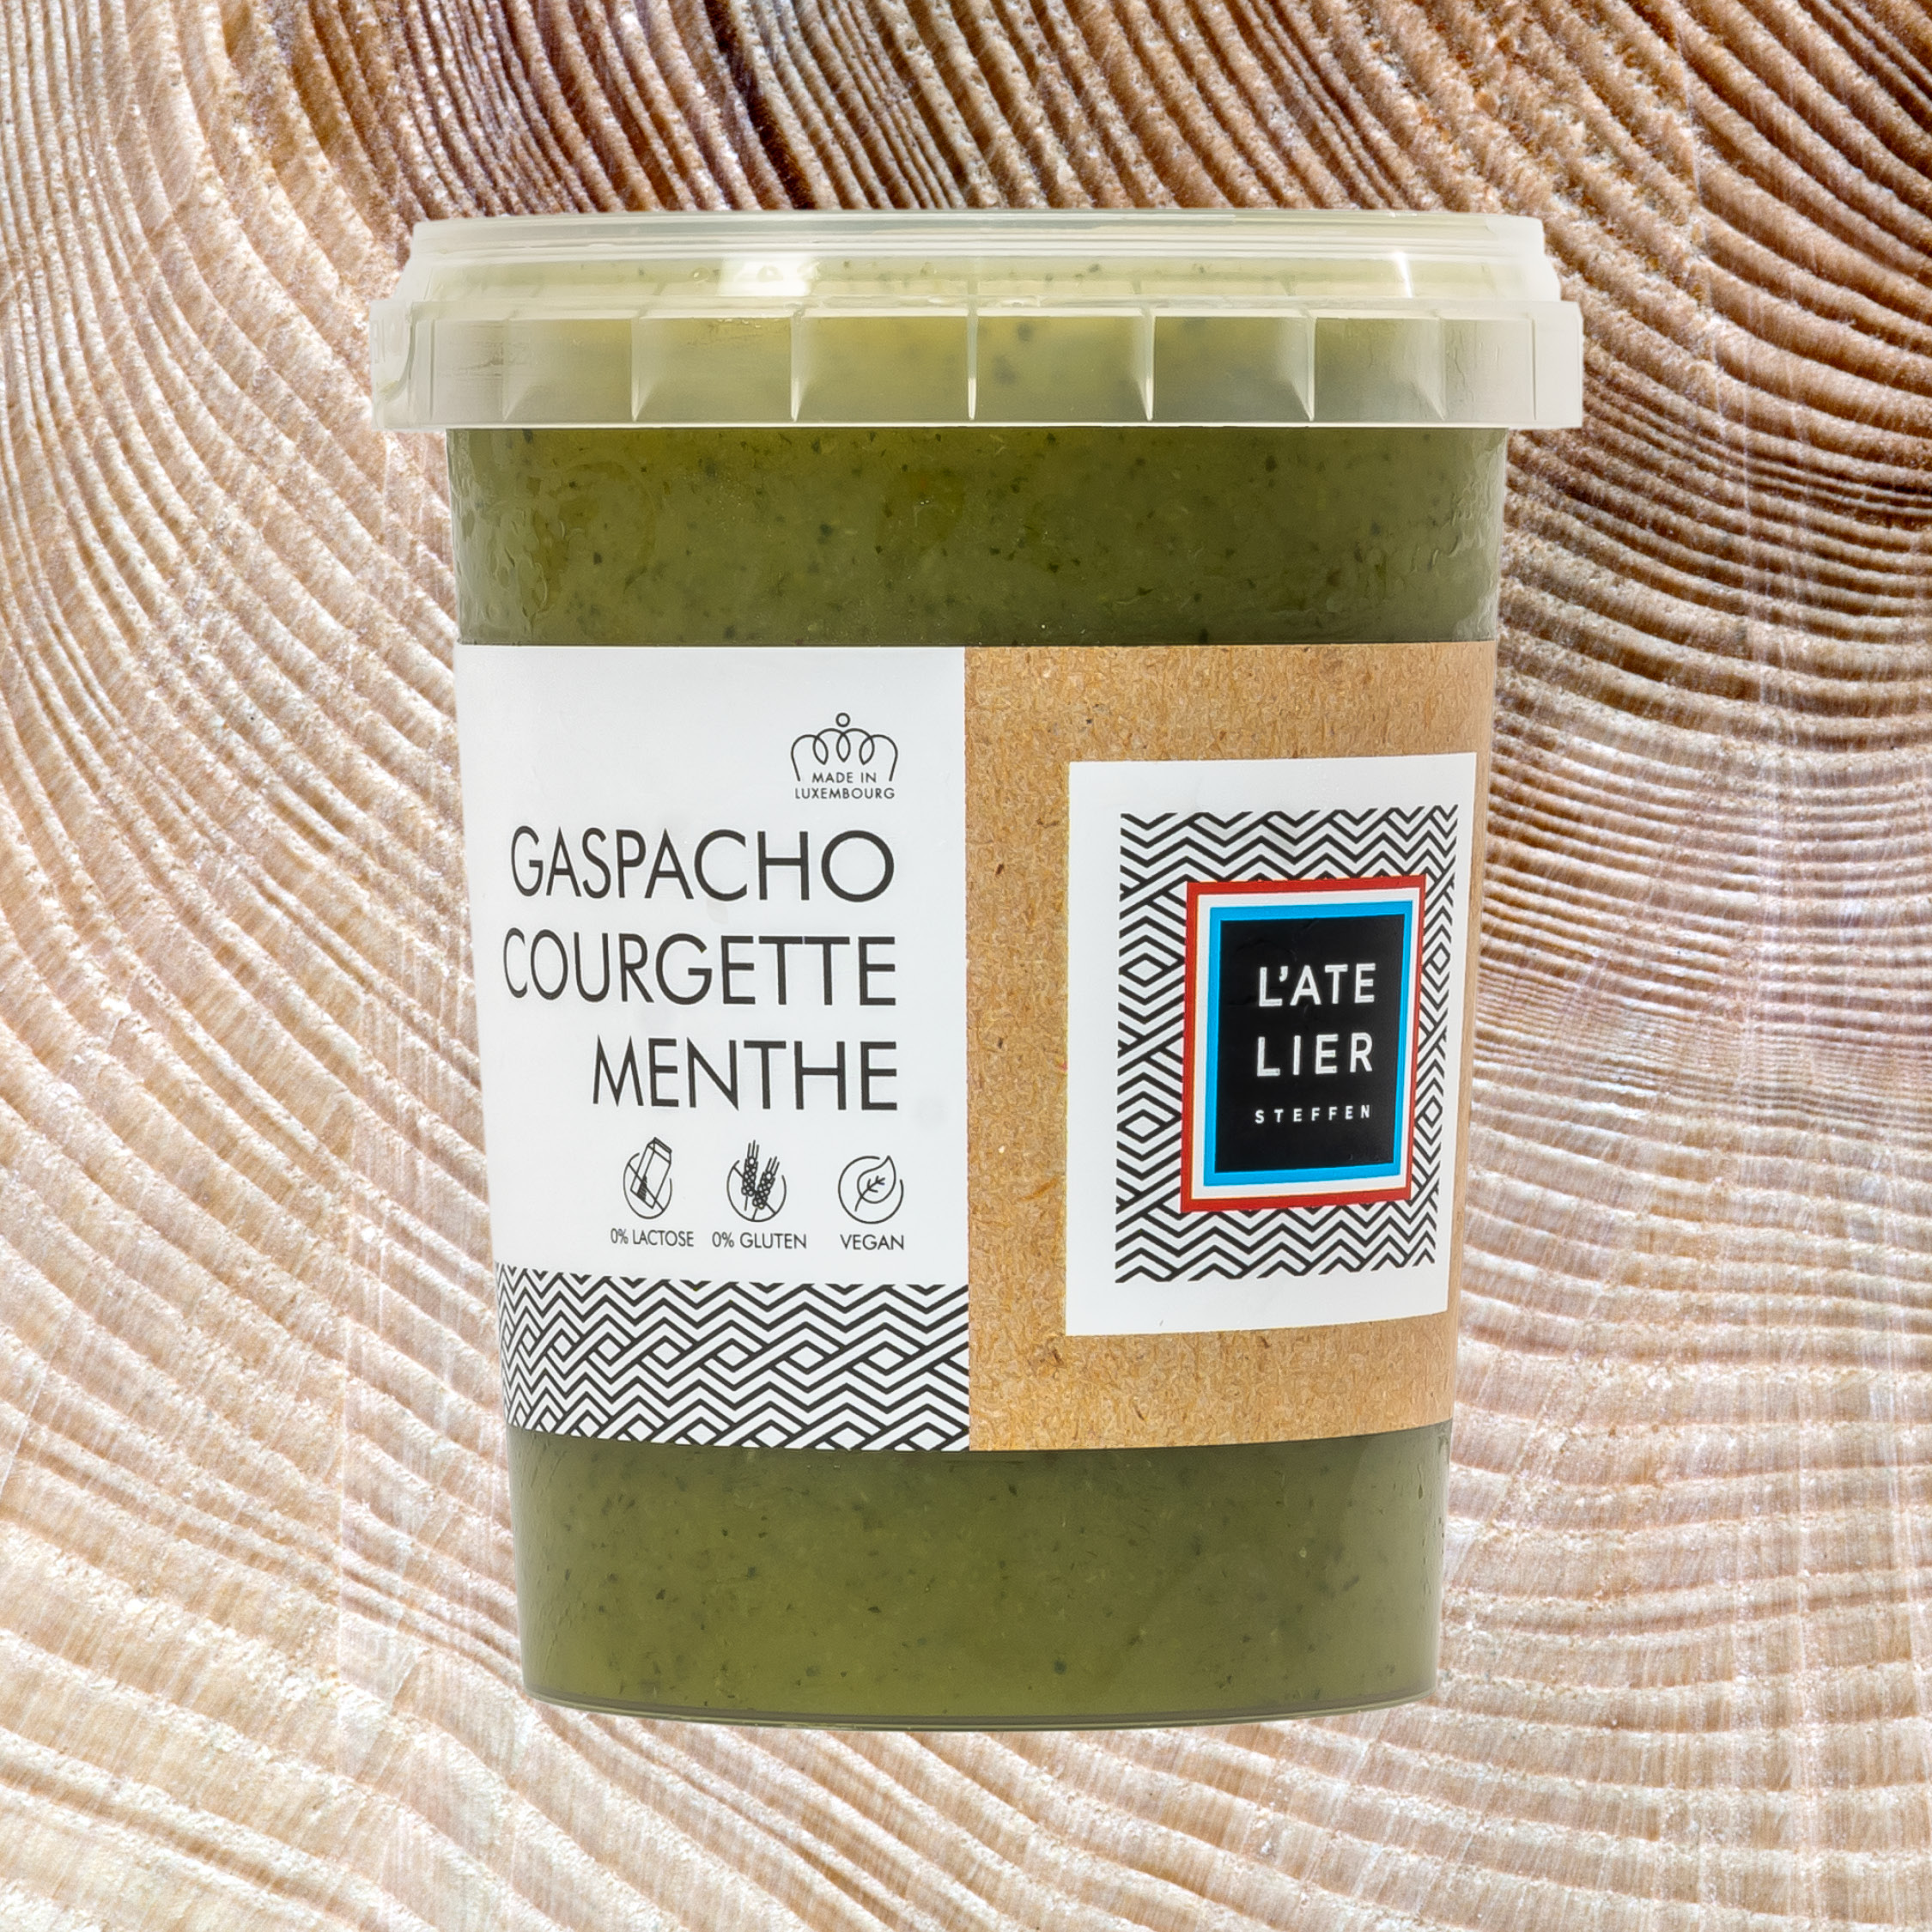 Gaspacho courgette menthe